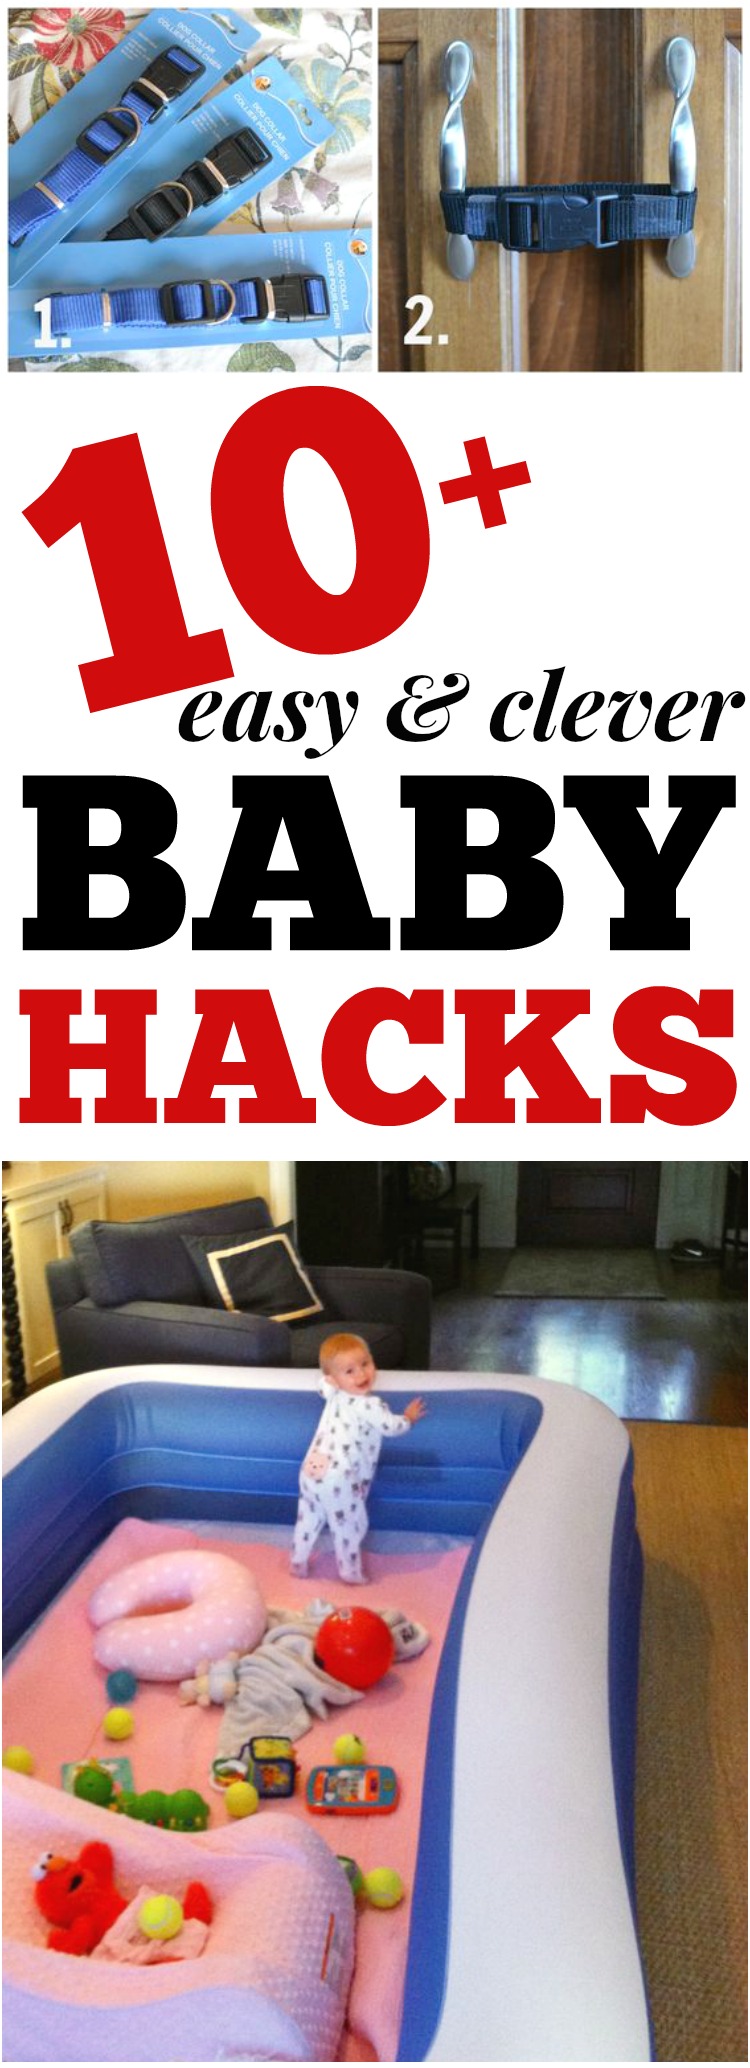 I can't believe I have never thought of these BABY HACKS!